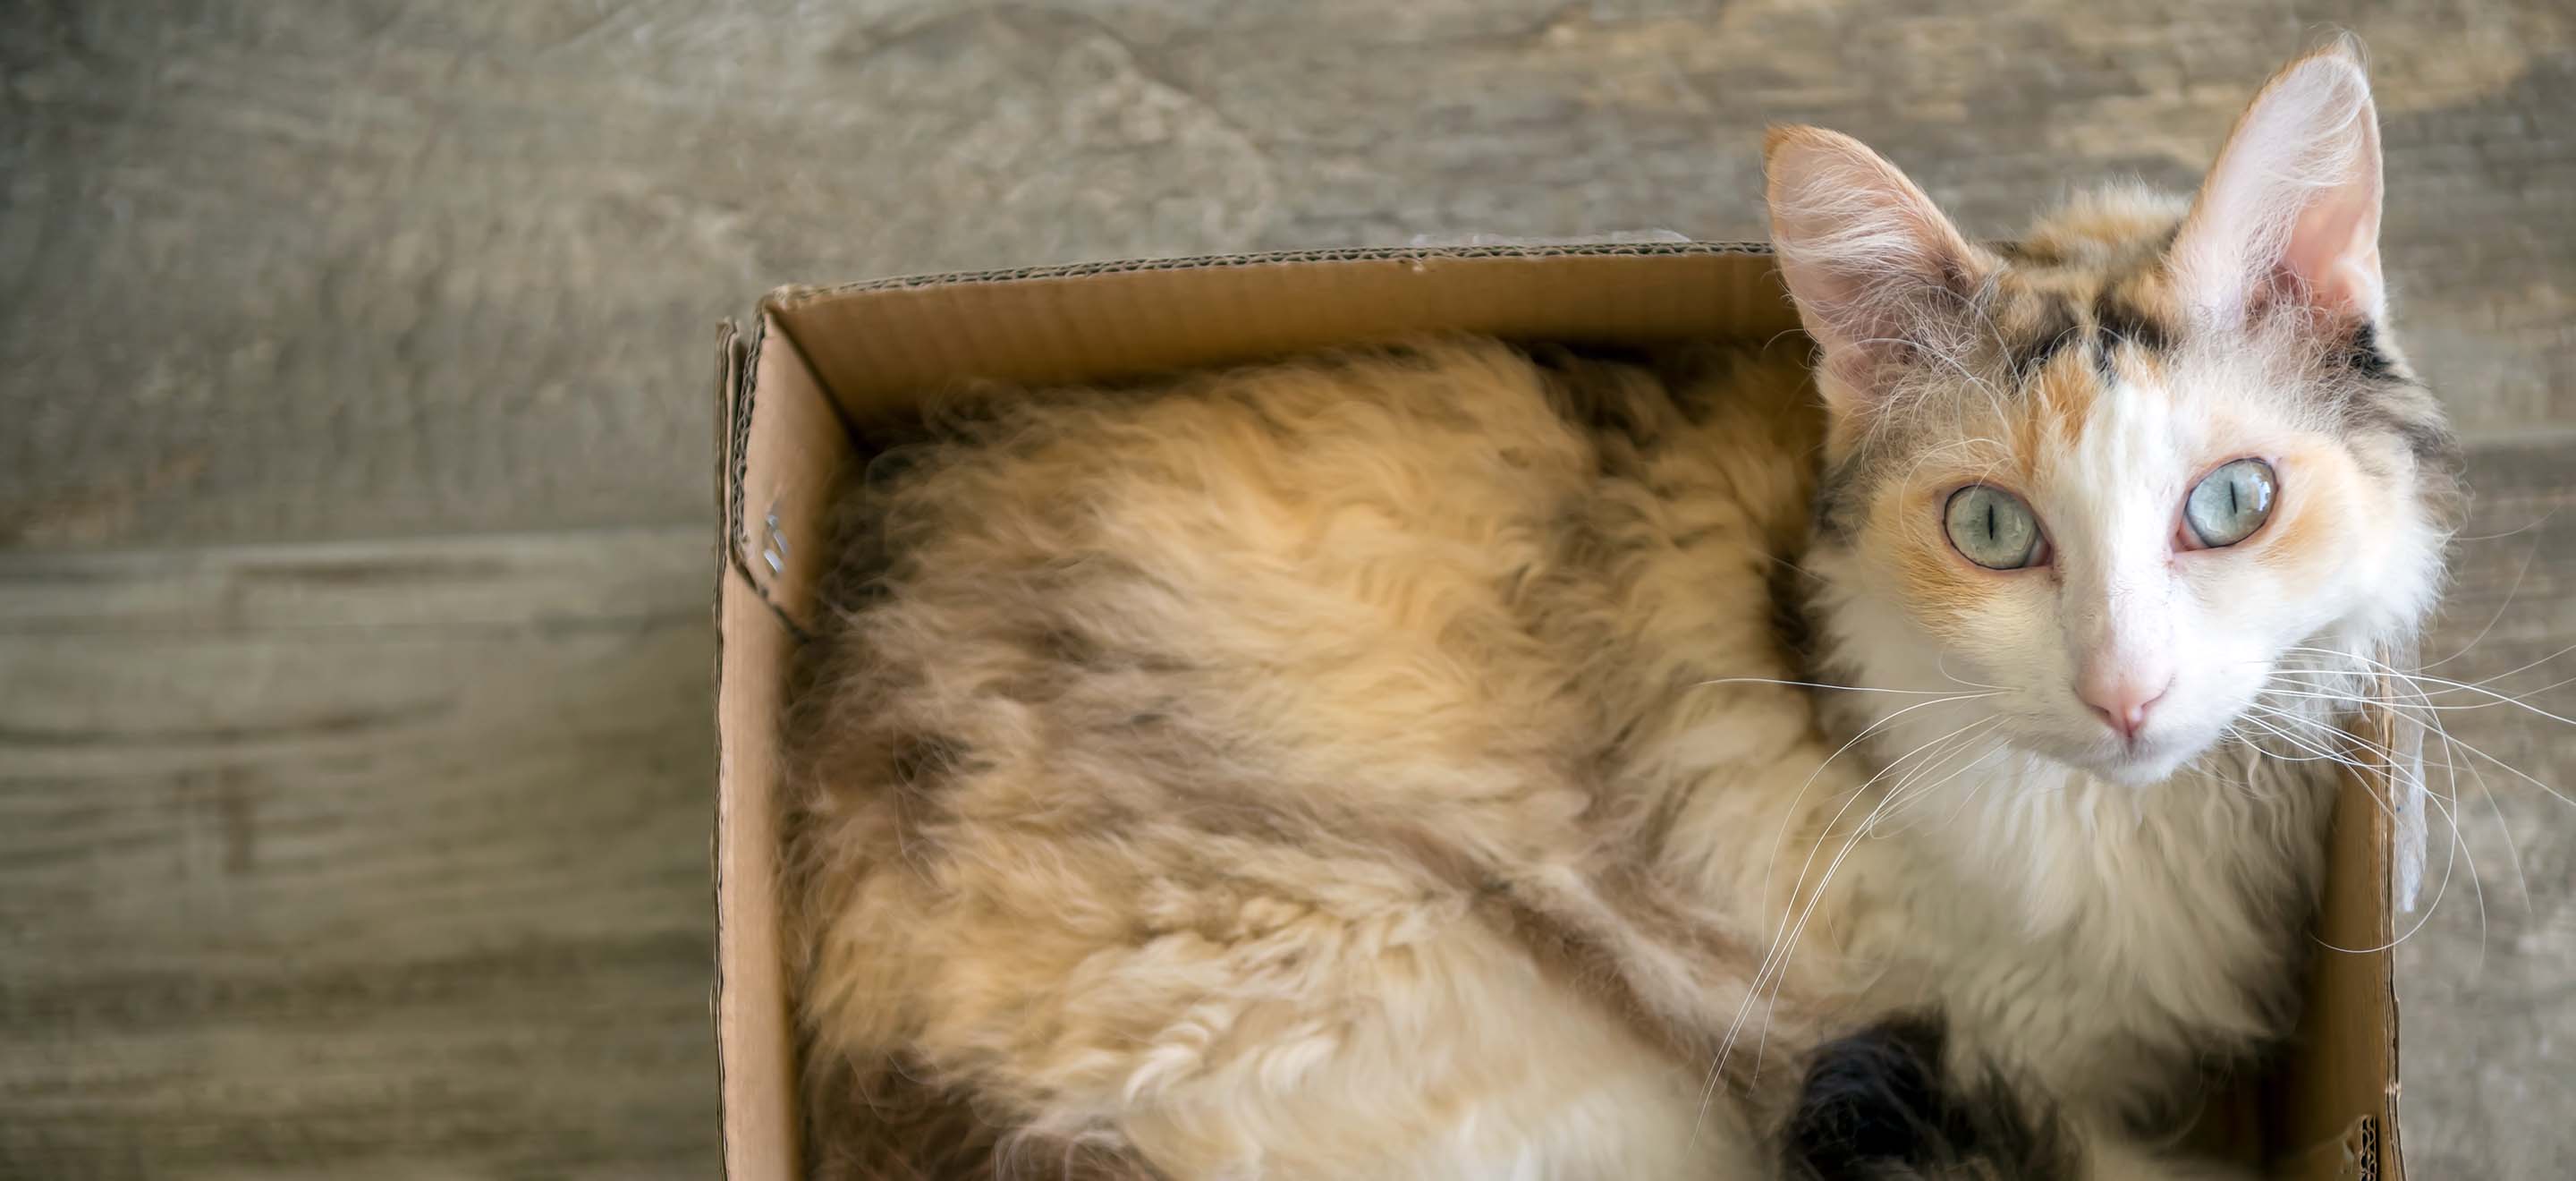 A Laperm cat sitting in a cardboard box on the floor image